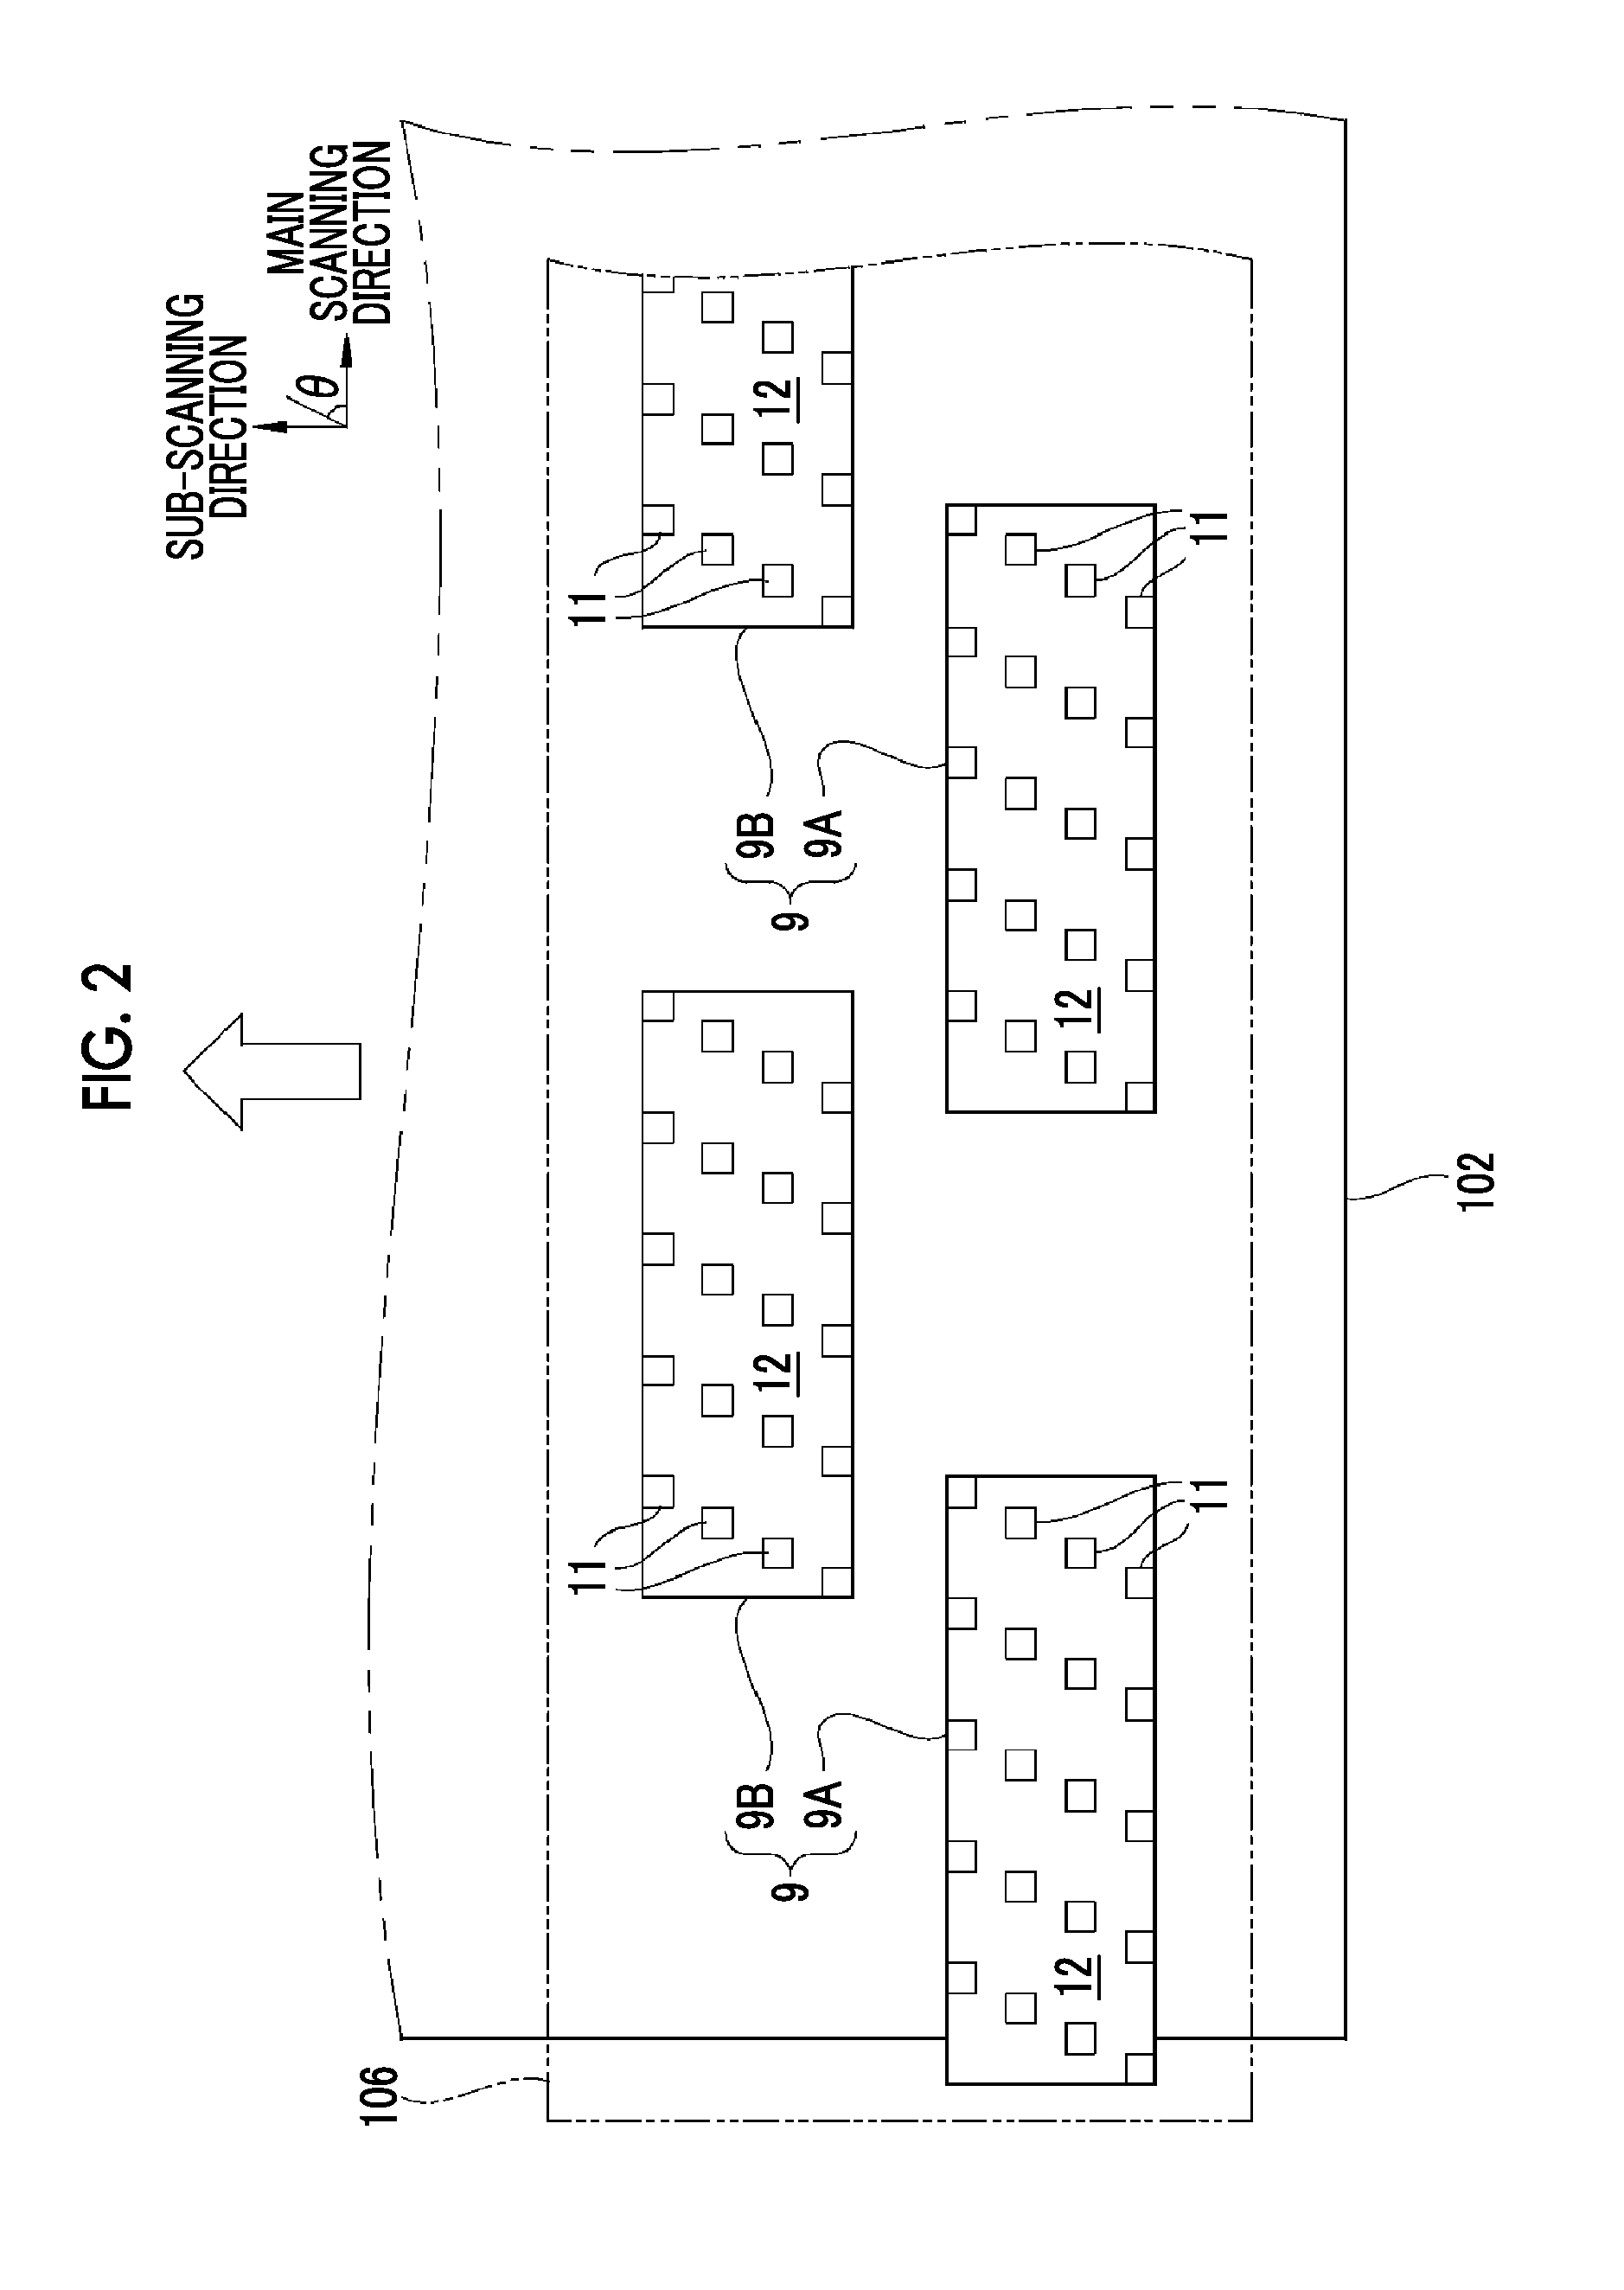 Recording head, method for producing same, and recording device